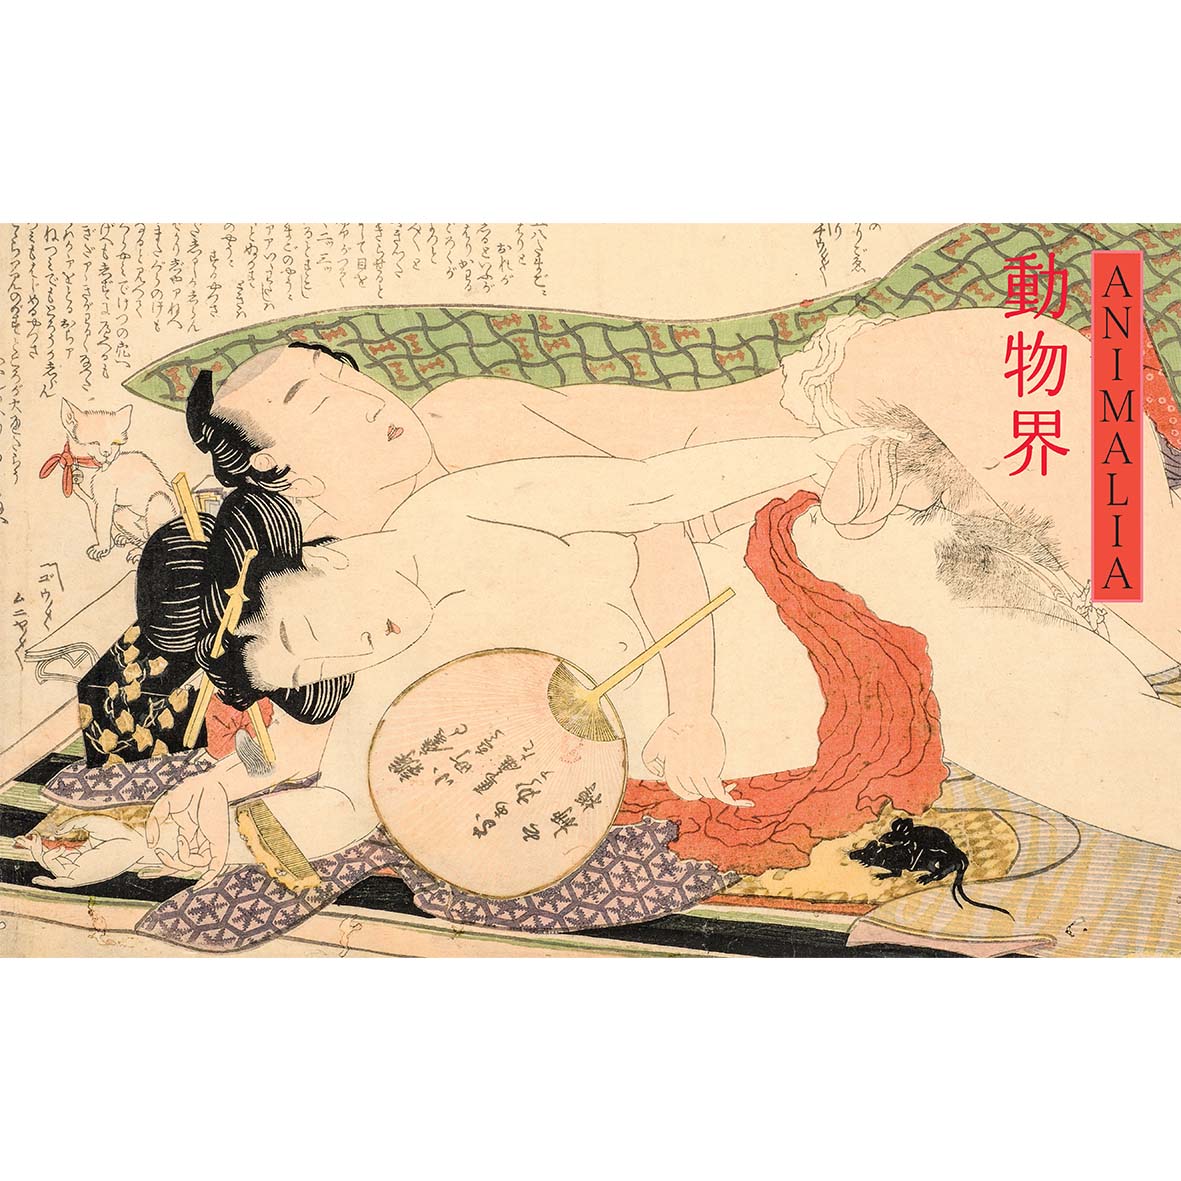 Shunga - Images of desire in the erotic art of Japan yesterday and today